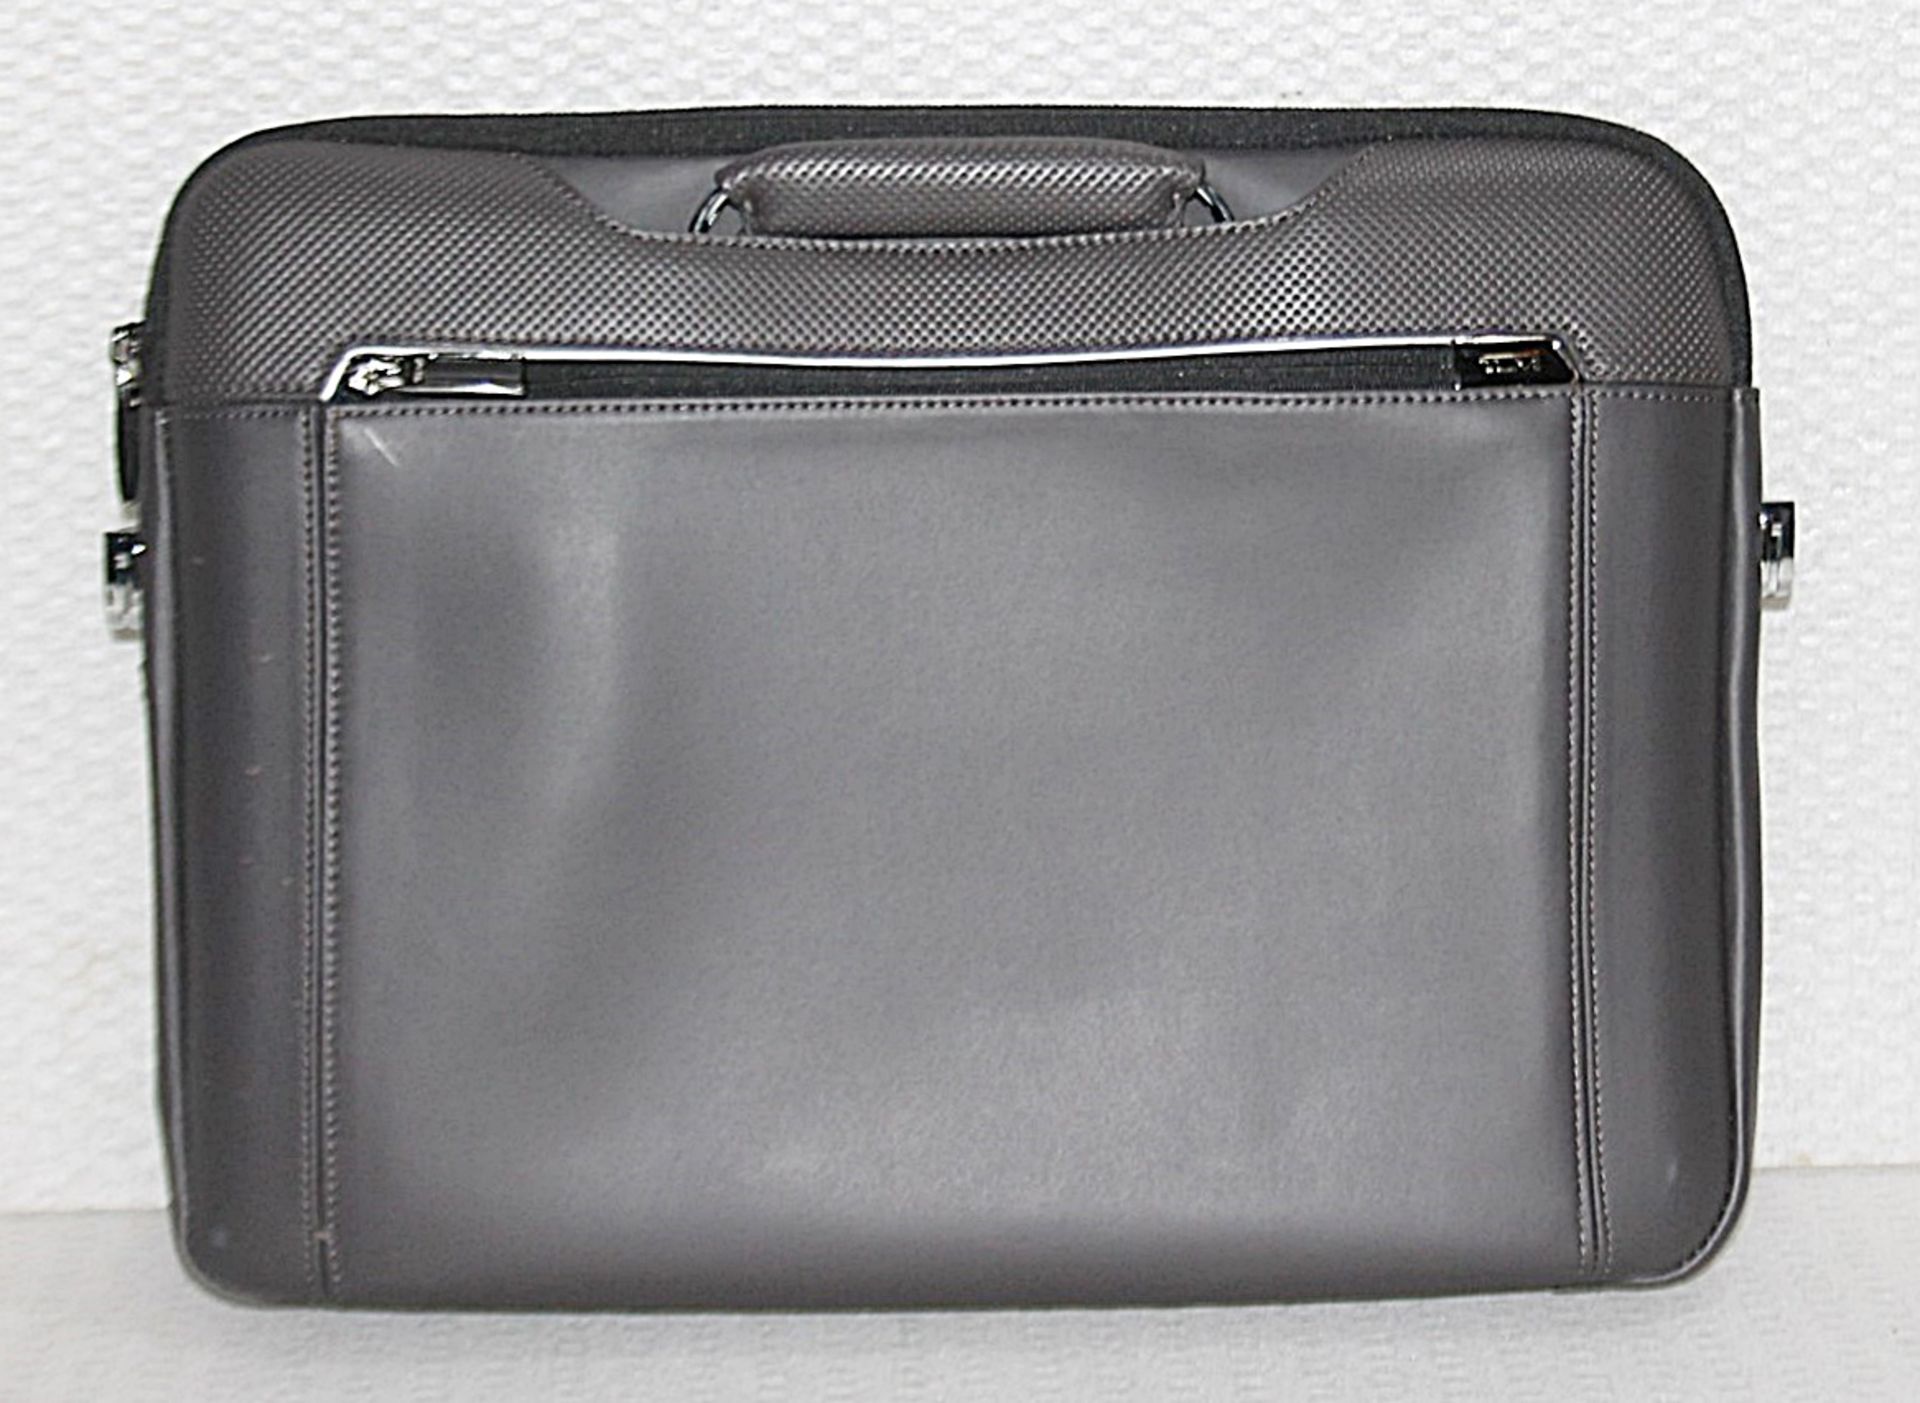 1 x TUMI Luxury Leather Slim Brief Case With Strap In A Taupe / Gunmetal Grey - Original Price £745 - Image 2 of 14